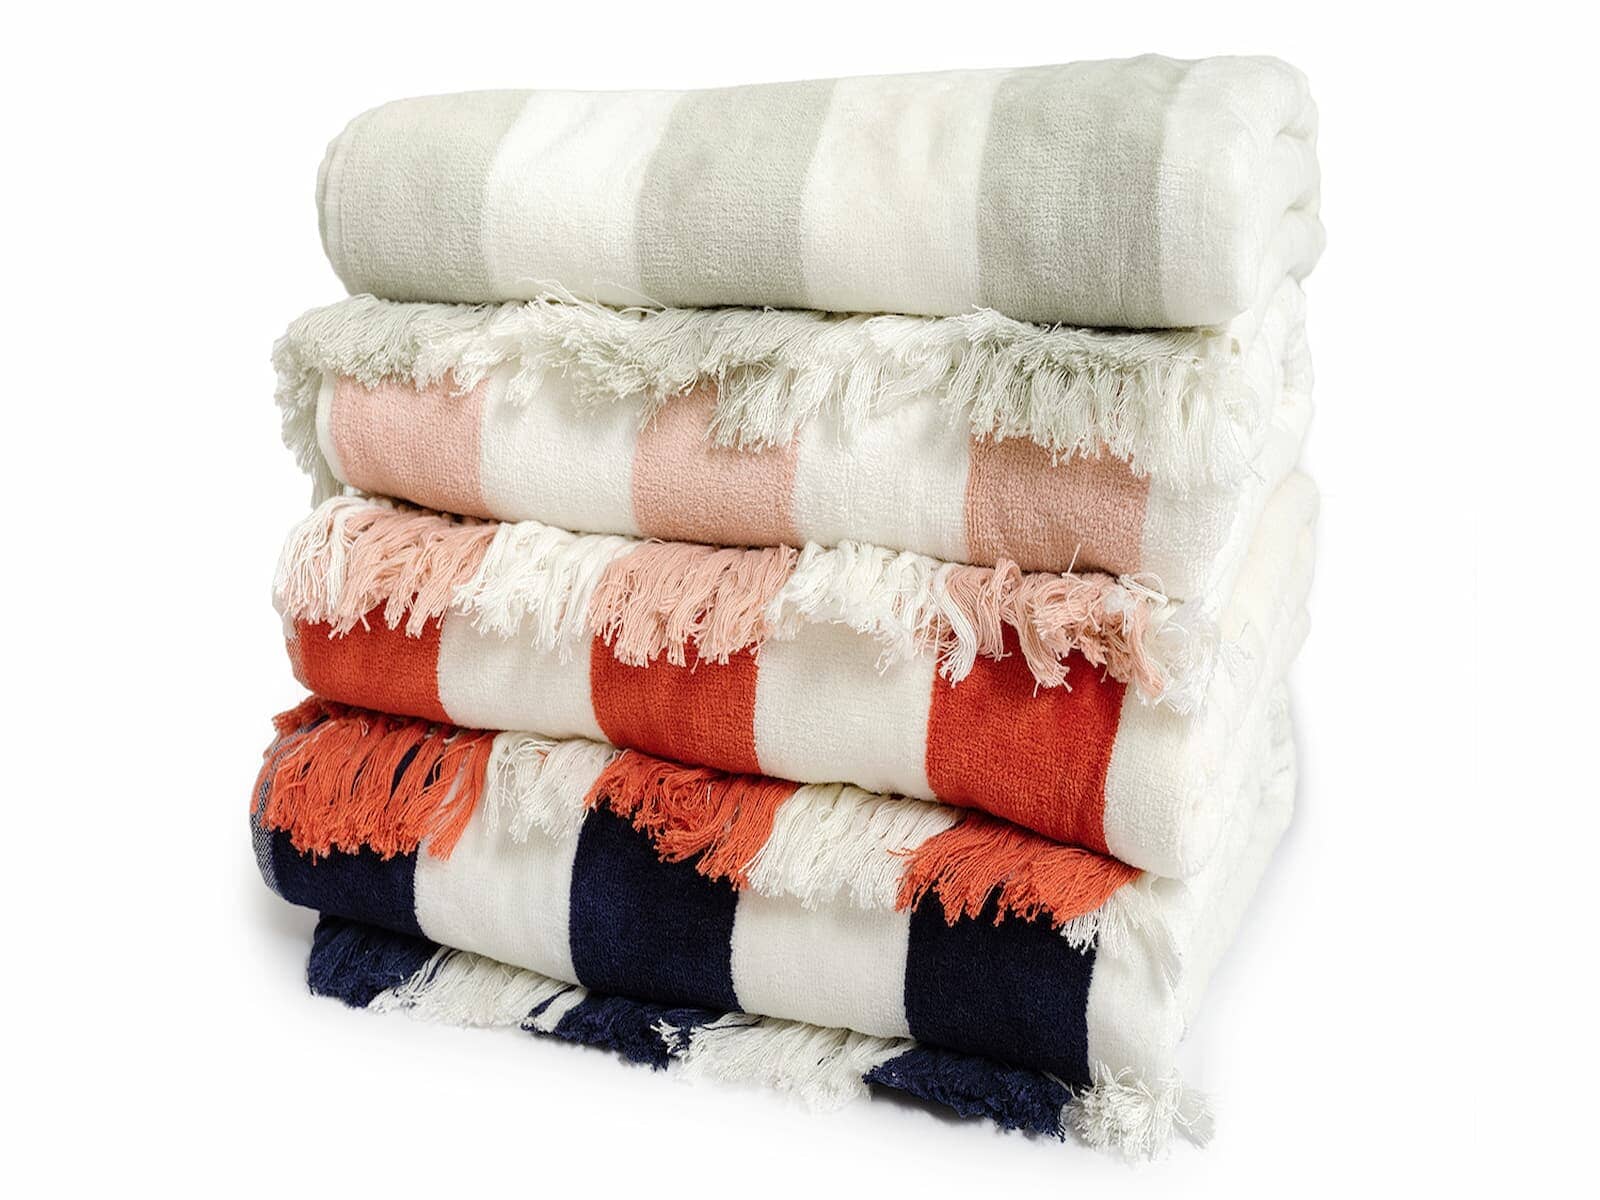 studio image of stacked holiday beach towels